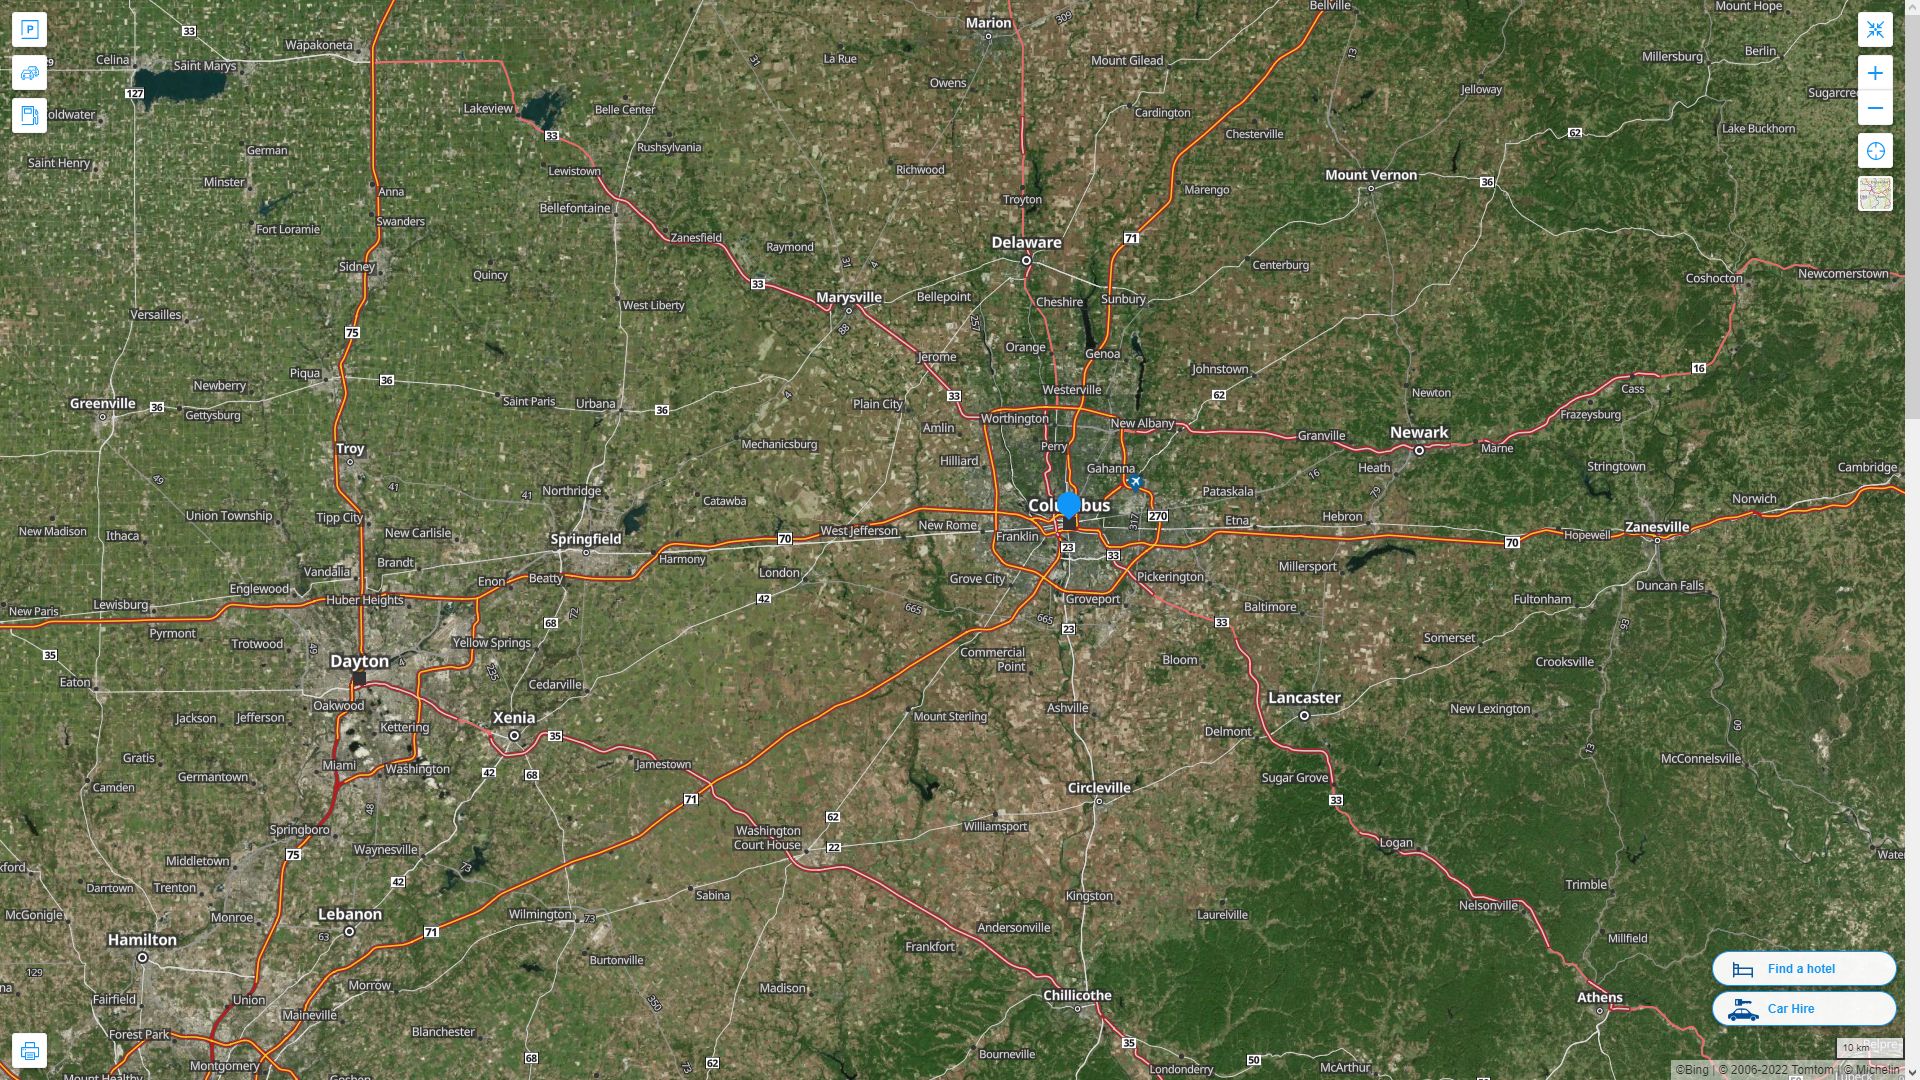 Columbus Ohio Highway and Road Map with Satellite View